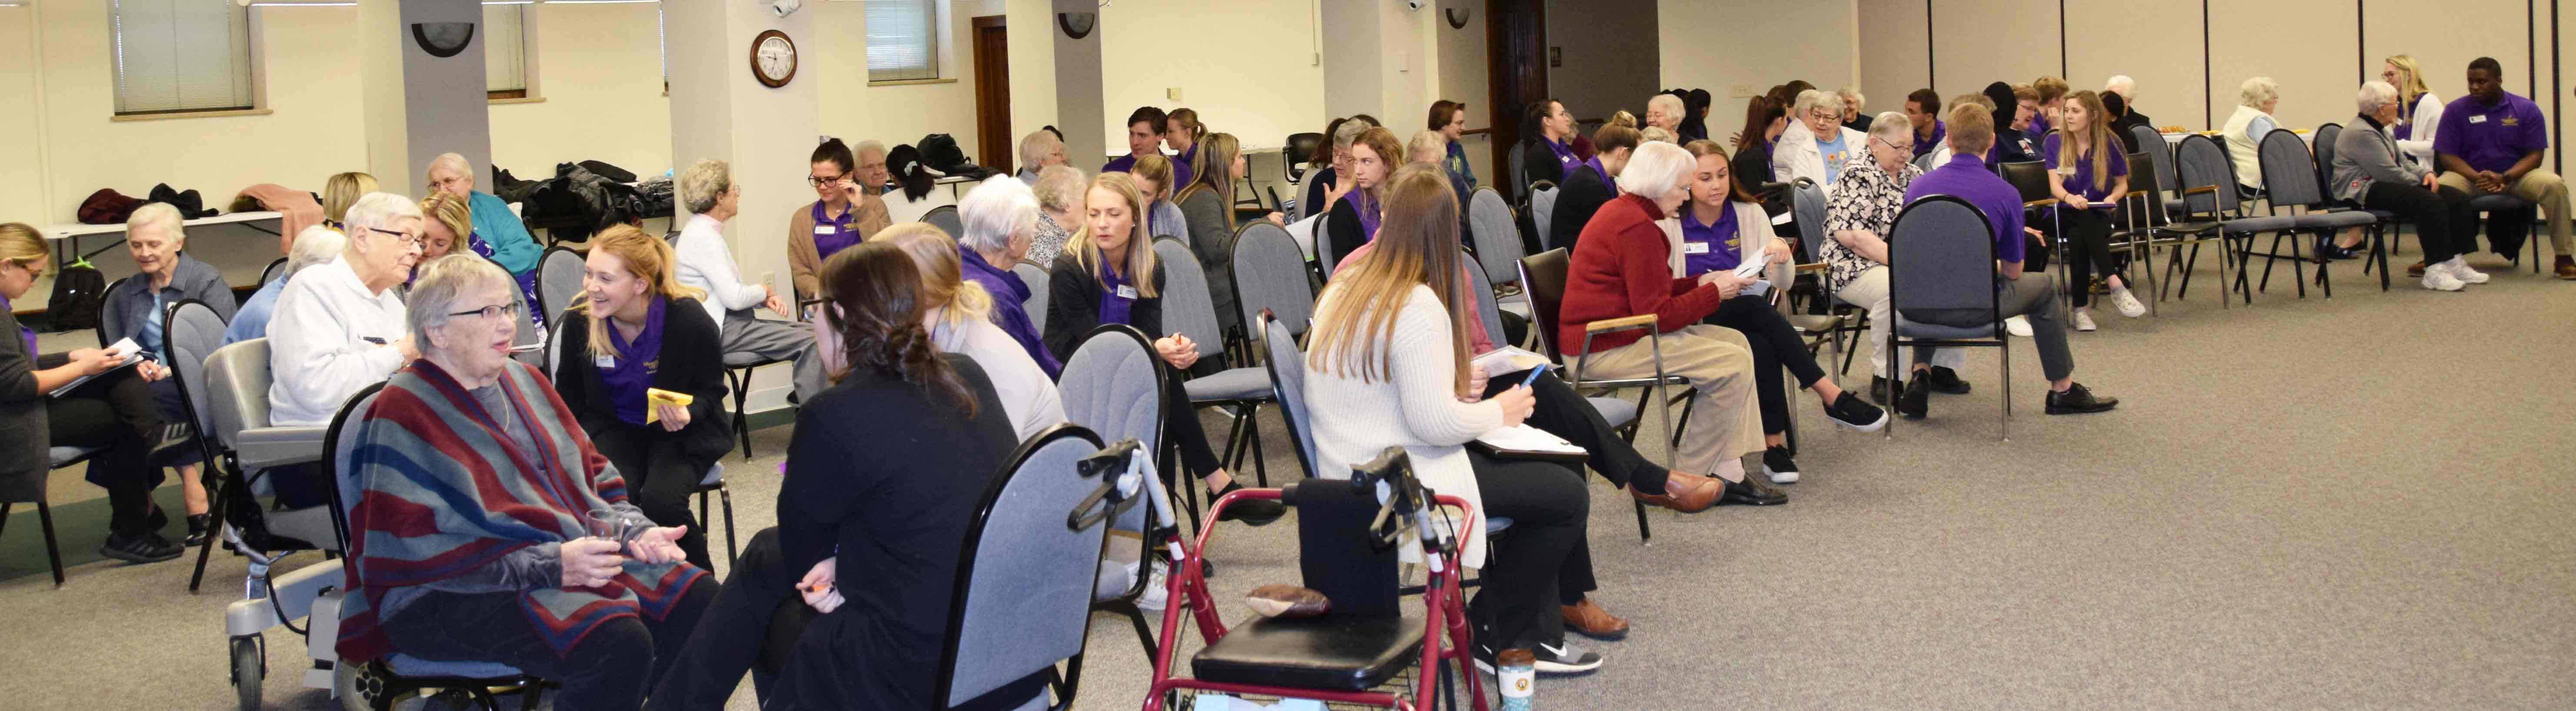 Dr. Kristen Abbott-Anderson, Assistant Professor with the College of Allied Health & Nursing at Minnesota State University (MNSU), Mankato, continues to utilize “Aging with Grace” by Dr. David Snowdon, in her Families in Transition 2 course work. Dr. Snow